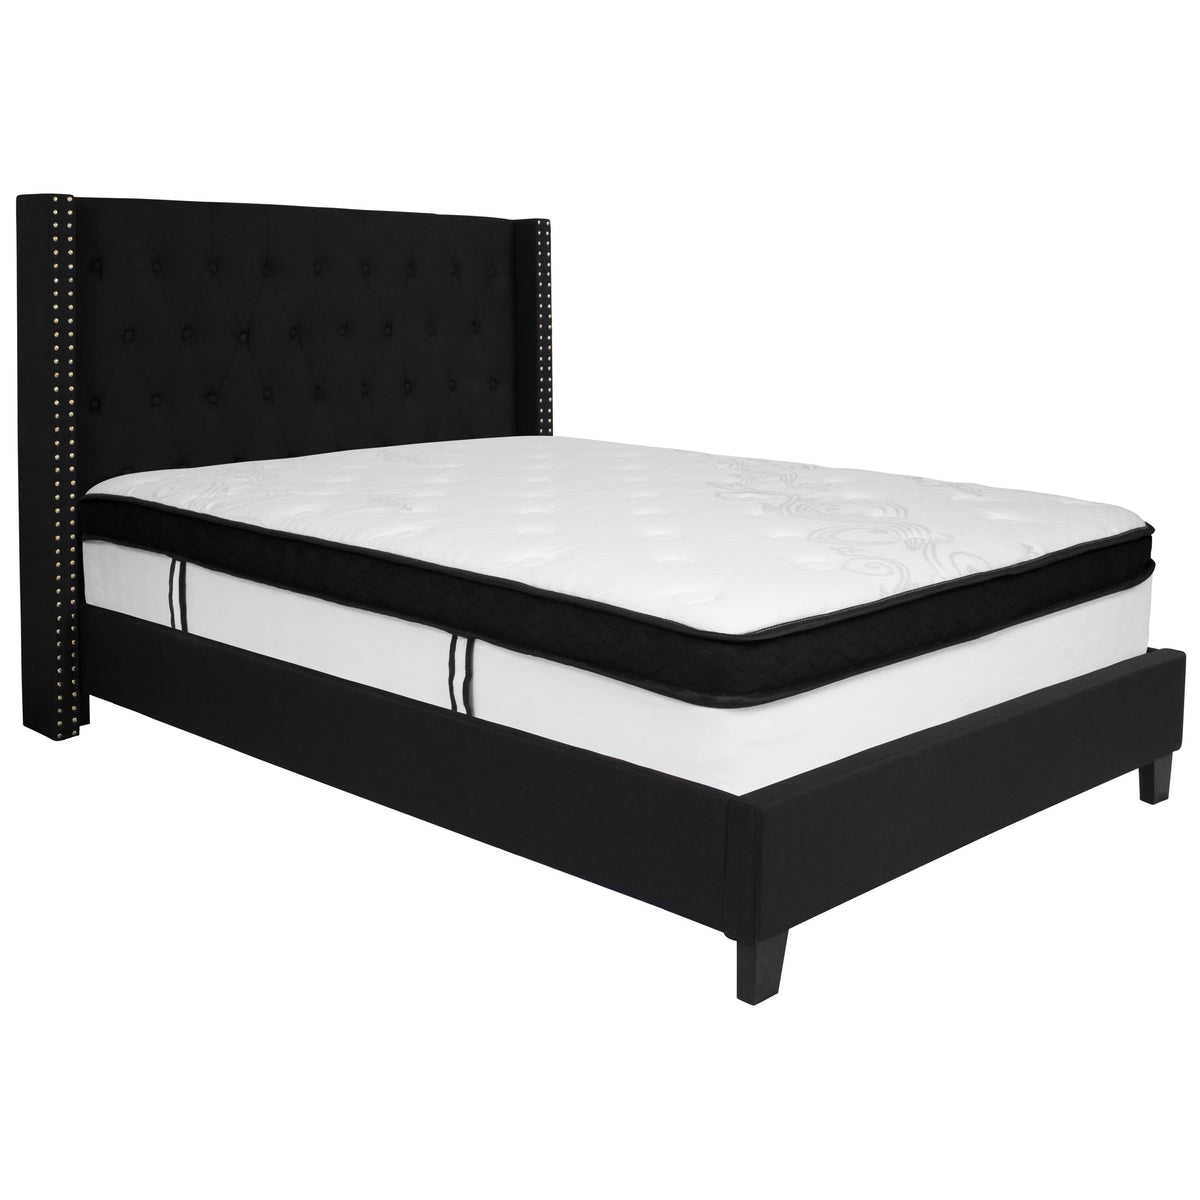 Black,Full |#| Full Size Tufted Black Fabric Platform Bed with Accent Nail Trim & Mattress